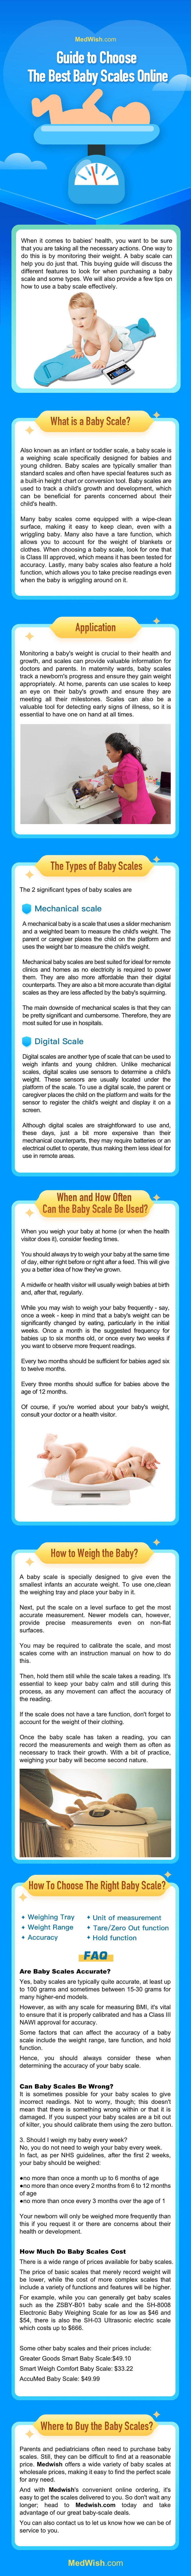 Advantages of using Baby Scales